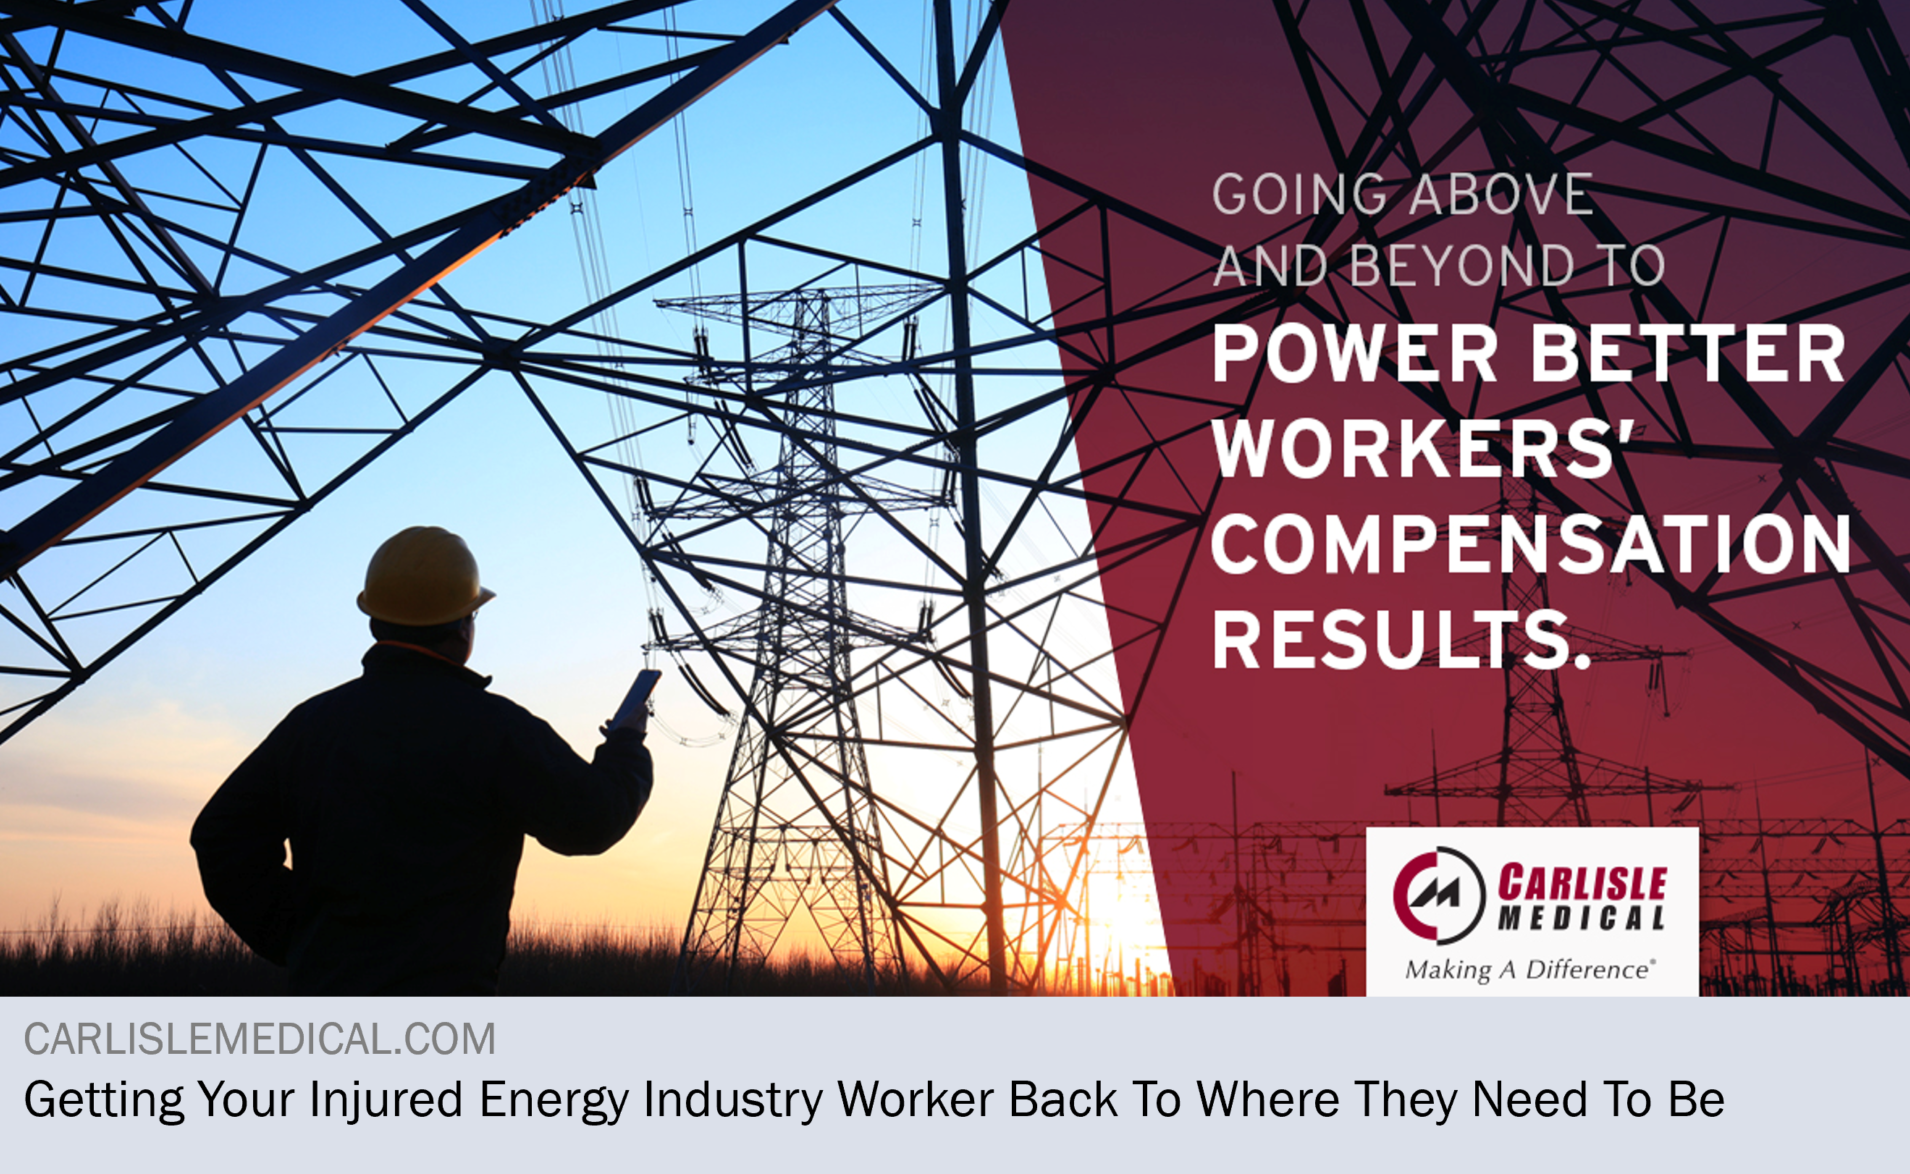 Getting Your Injured Energy Industry Worker Back To Where They Need To Be